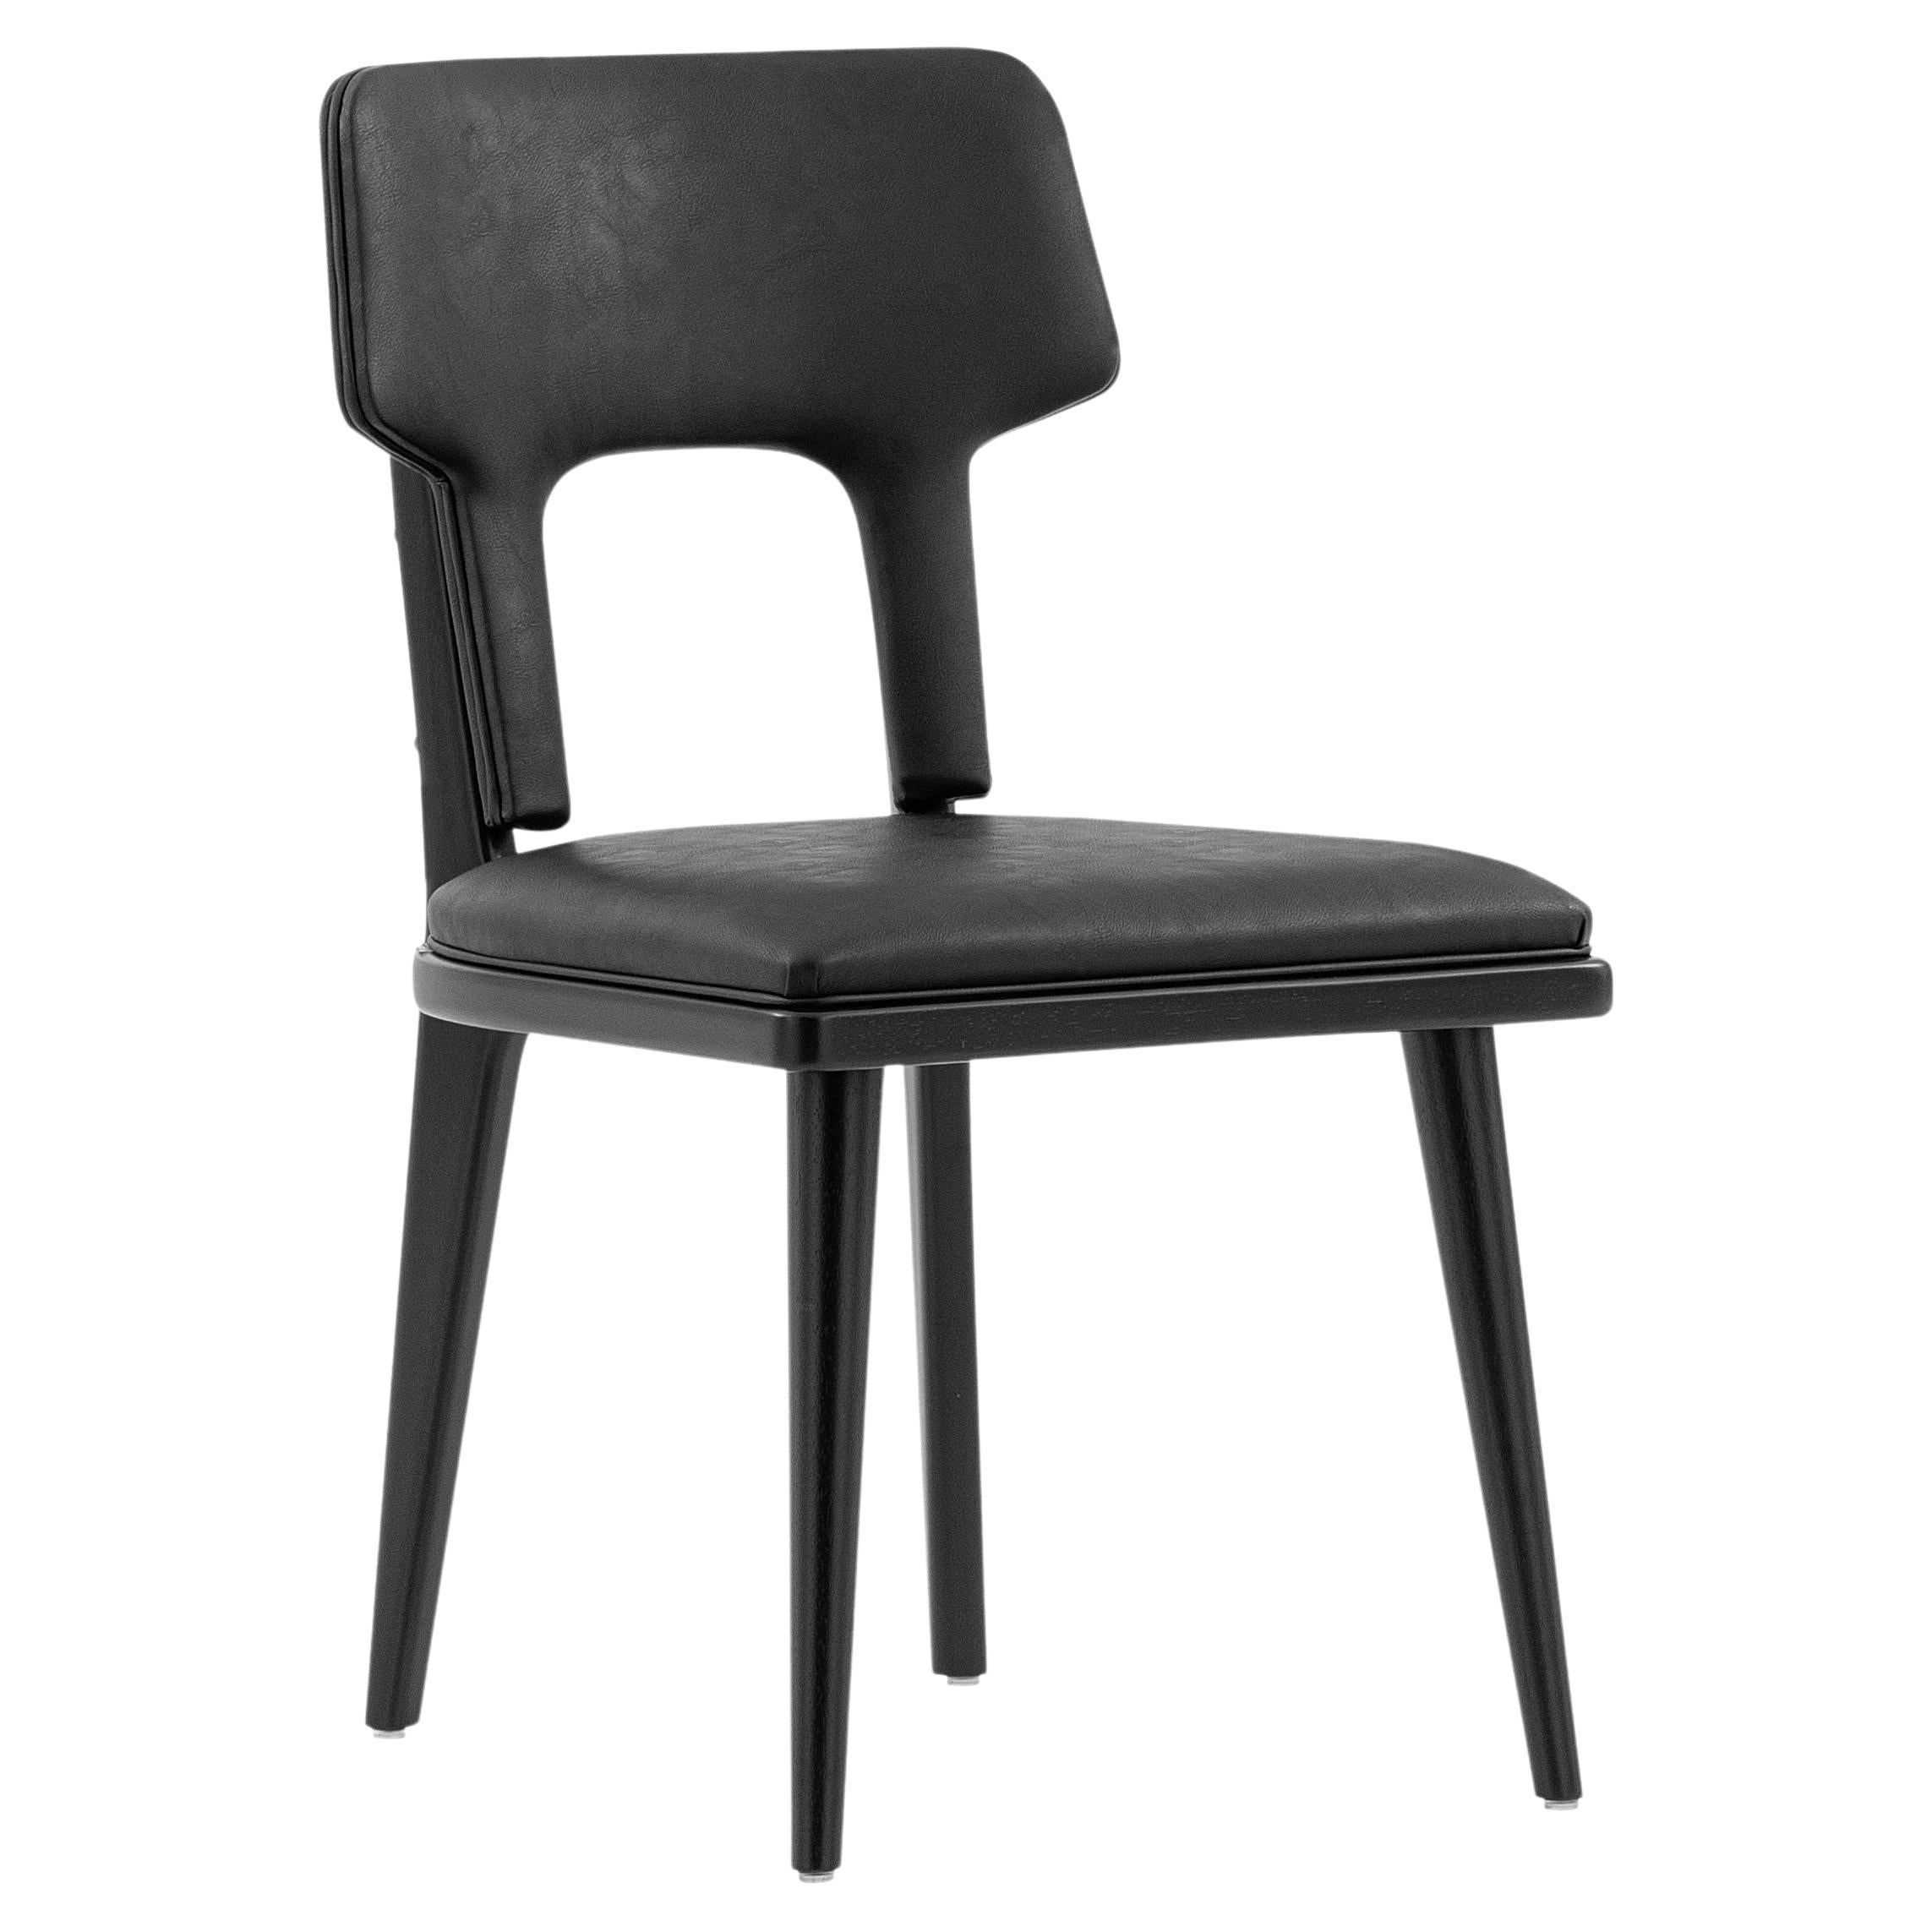 The Fork dining chair has been made by our Uultis team with black fabric and a black wood Uultis finish for the legs. Our amazing team at Uultis has thought of every little detail so this dining chair is perfect and comfortable as well as